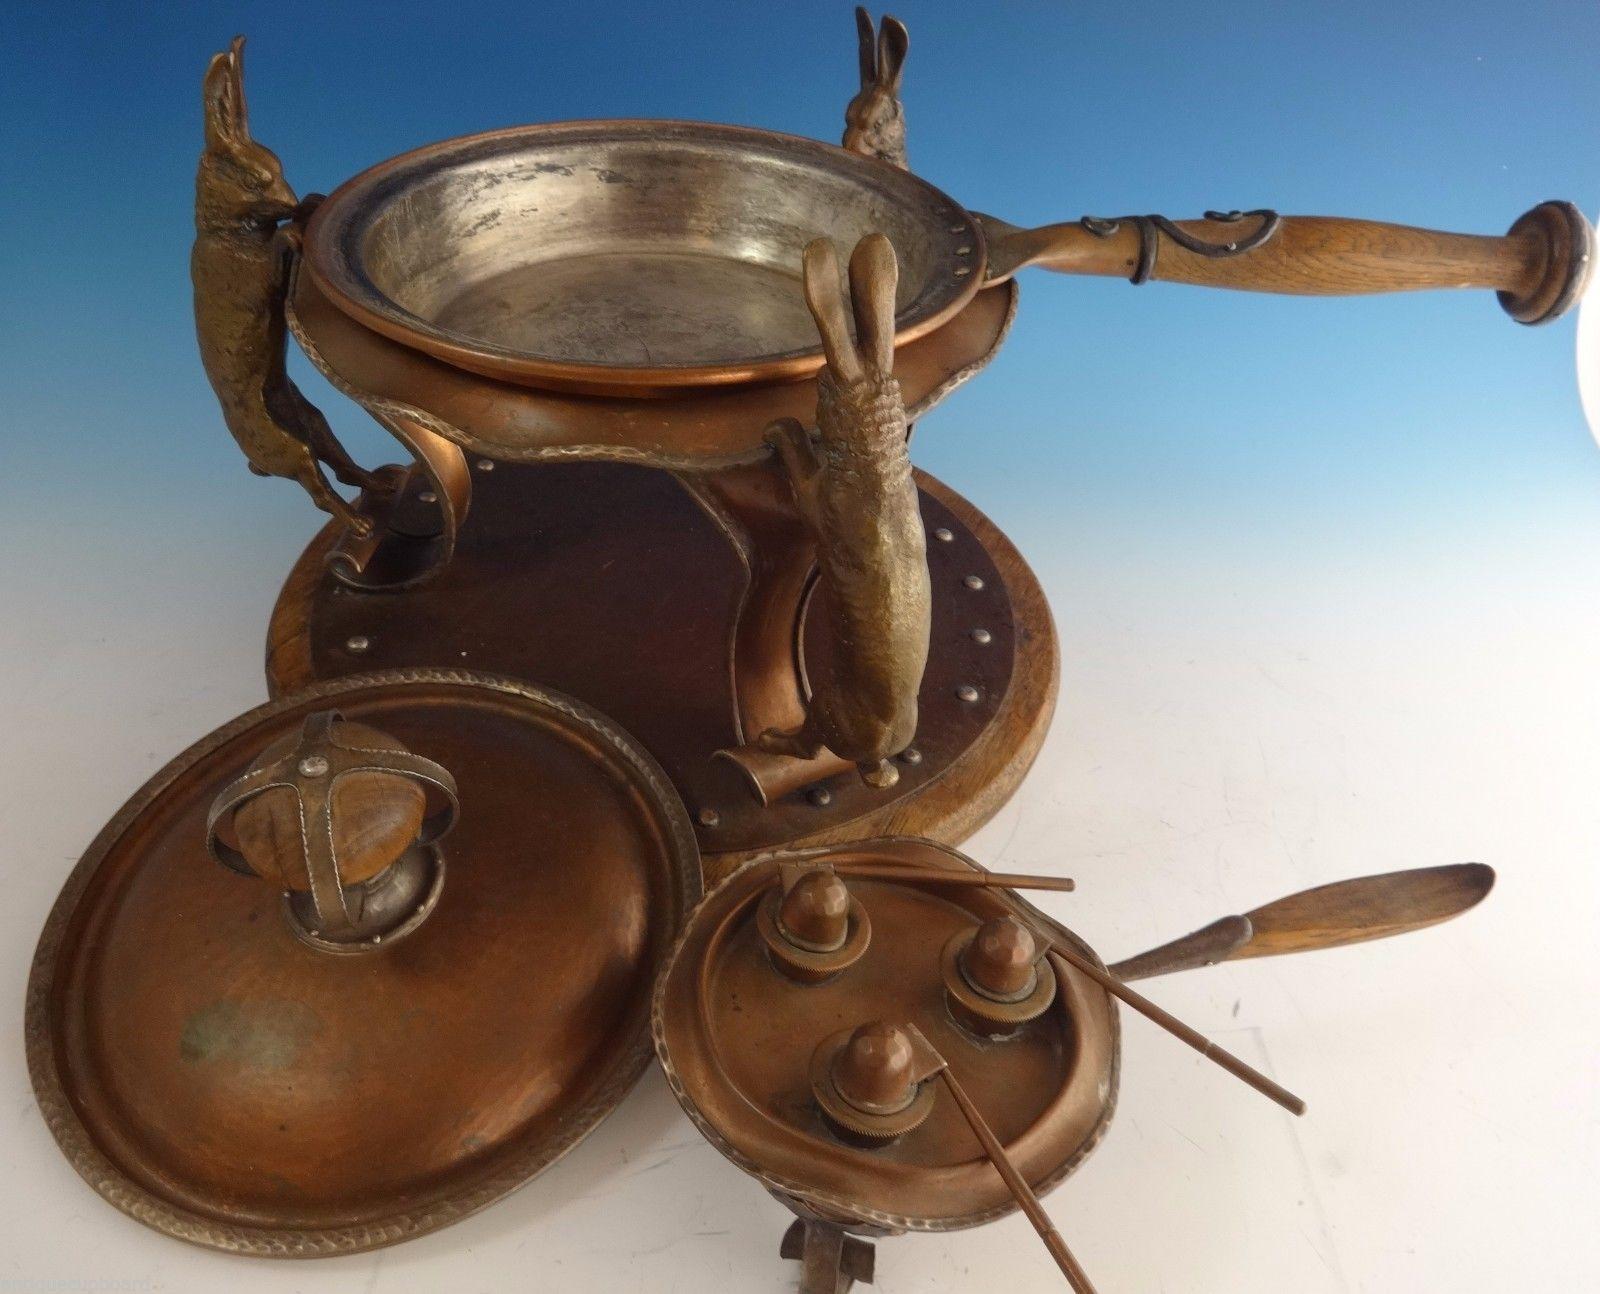 20th Century Joseph Heinrichs Copper Chafing Dish and Stand/Burner with 3-D Rabbits